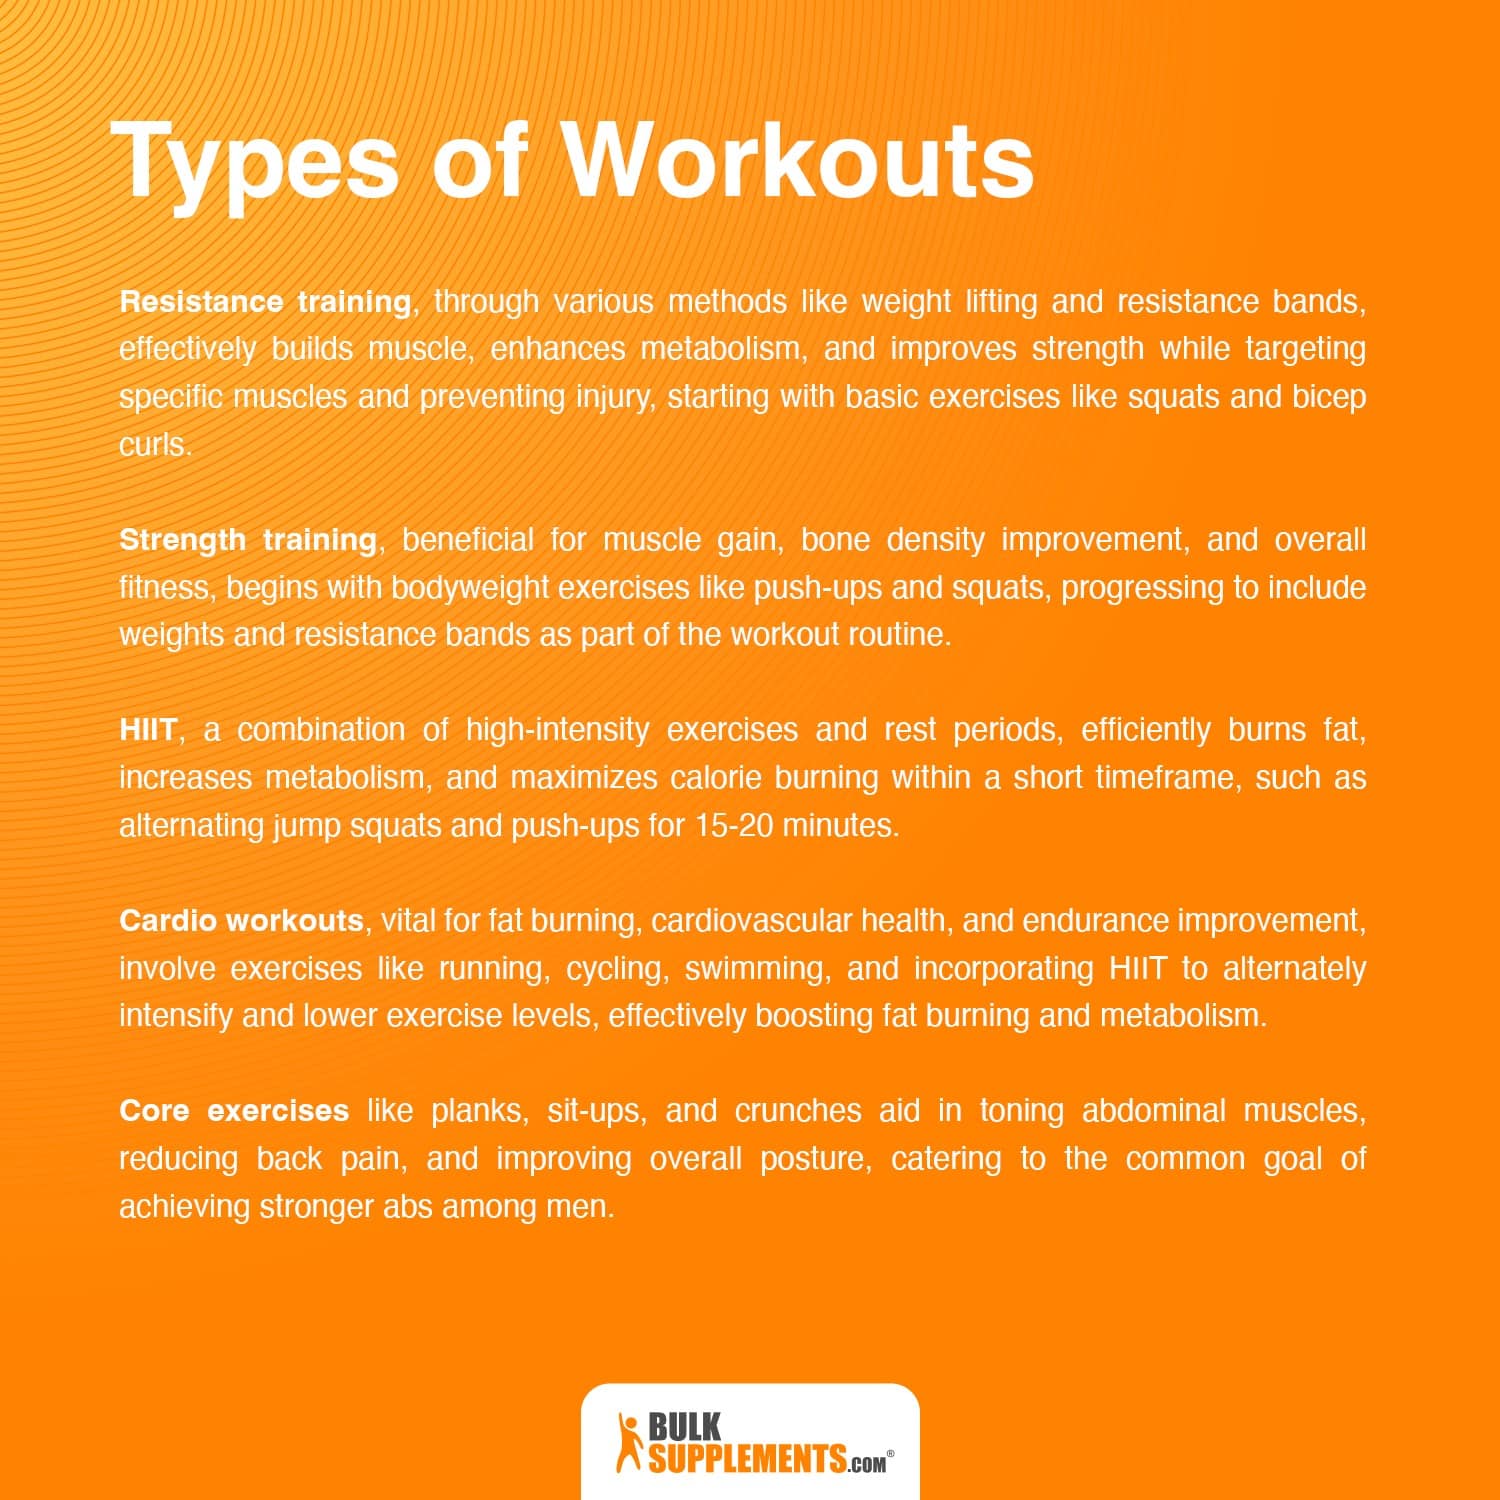 types of workouts for men